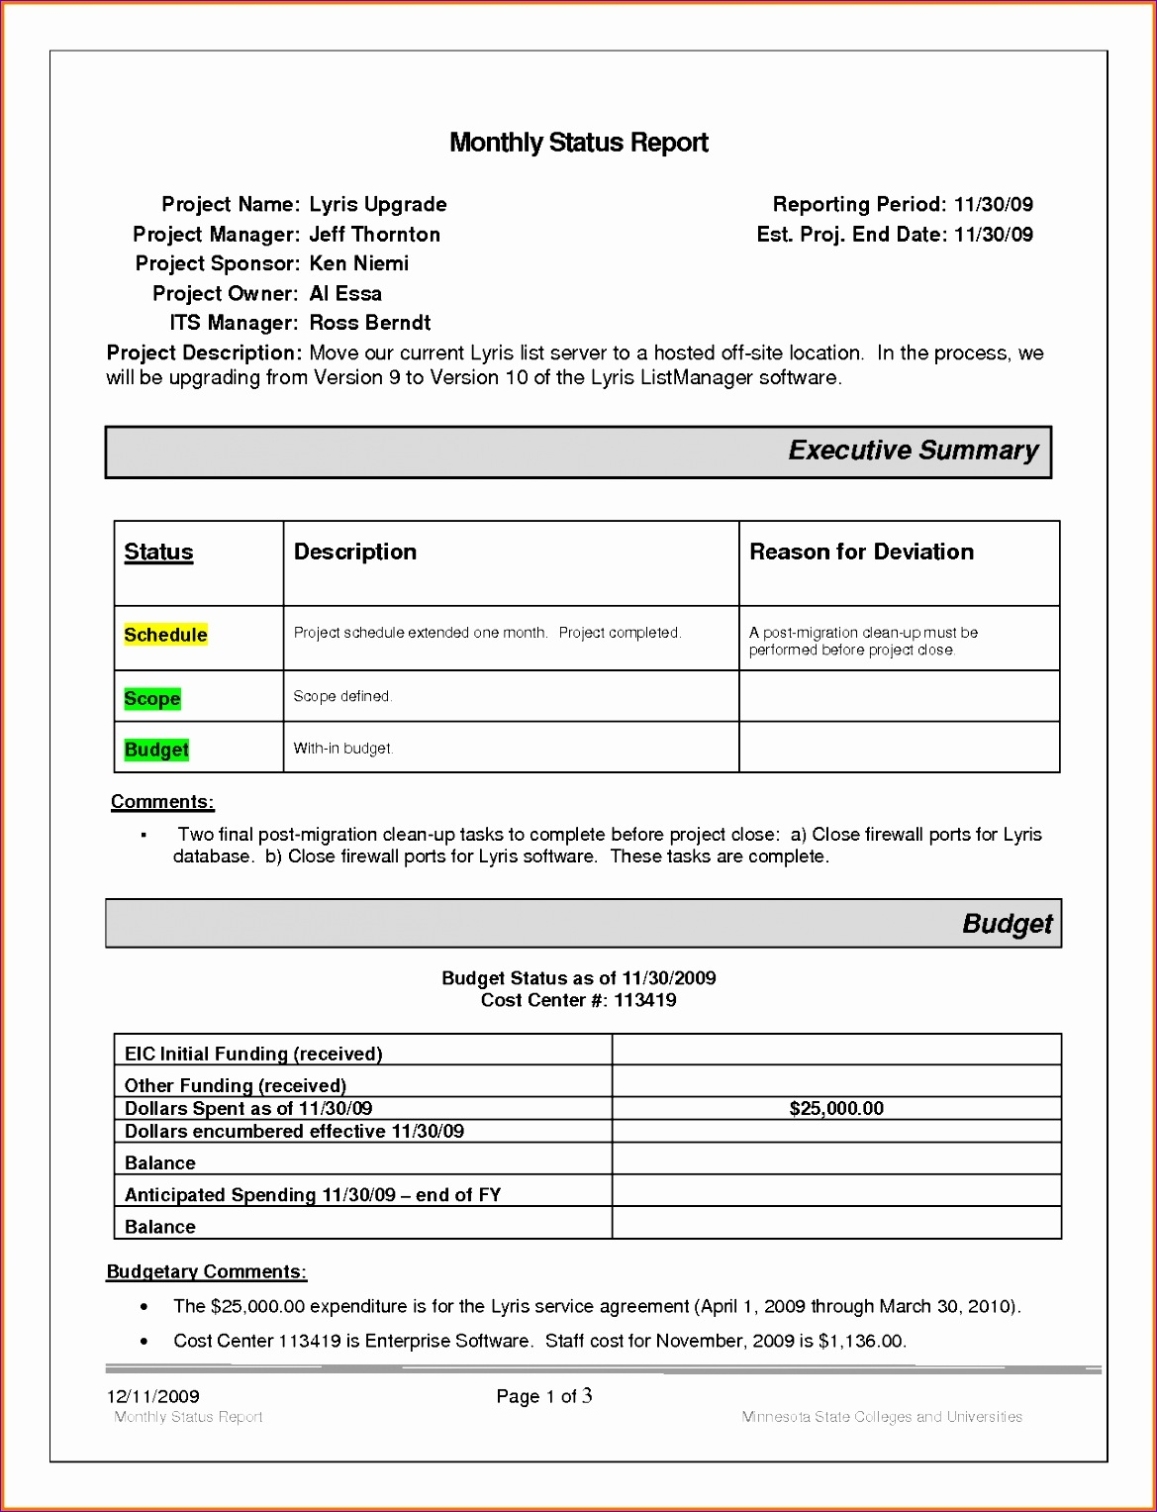 Monthly Status Report Template | Best Template Ideas Pertaining To Project Manager Status Report Template